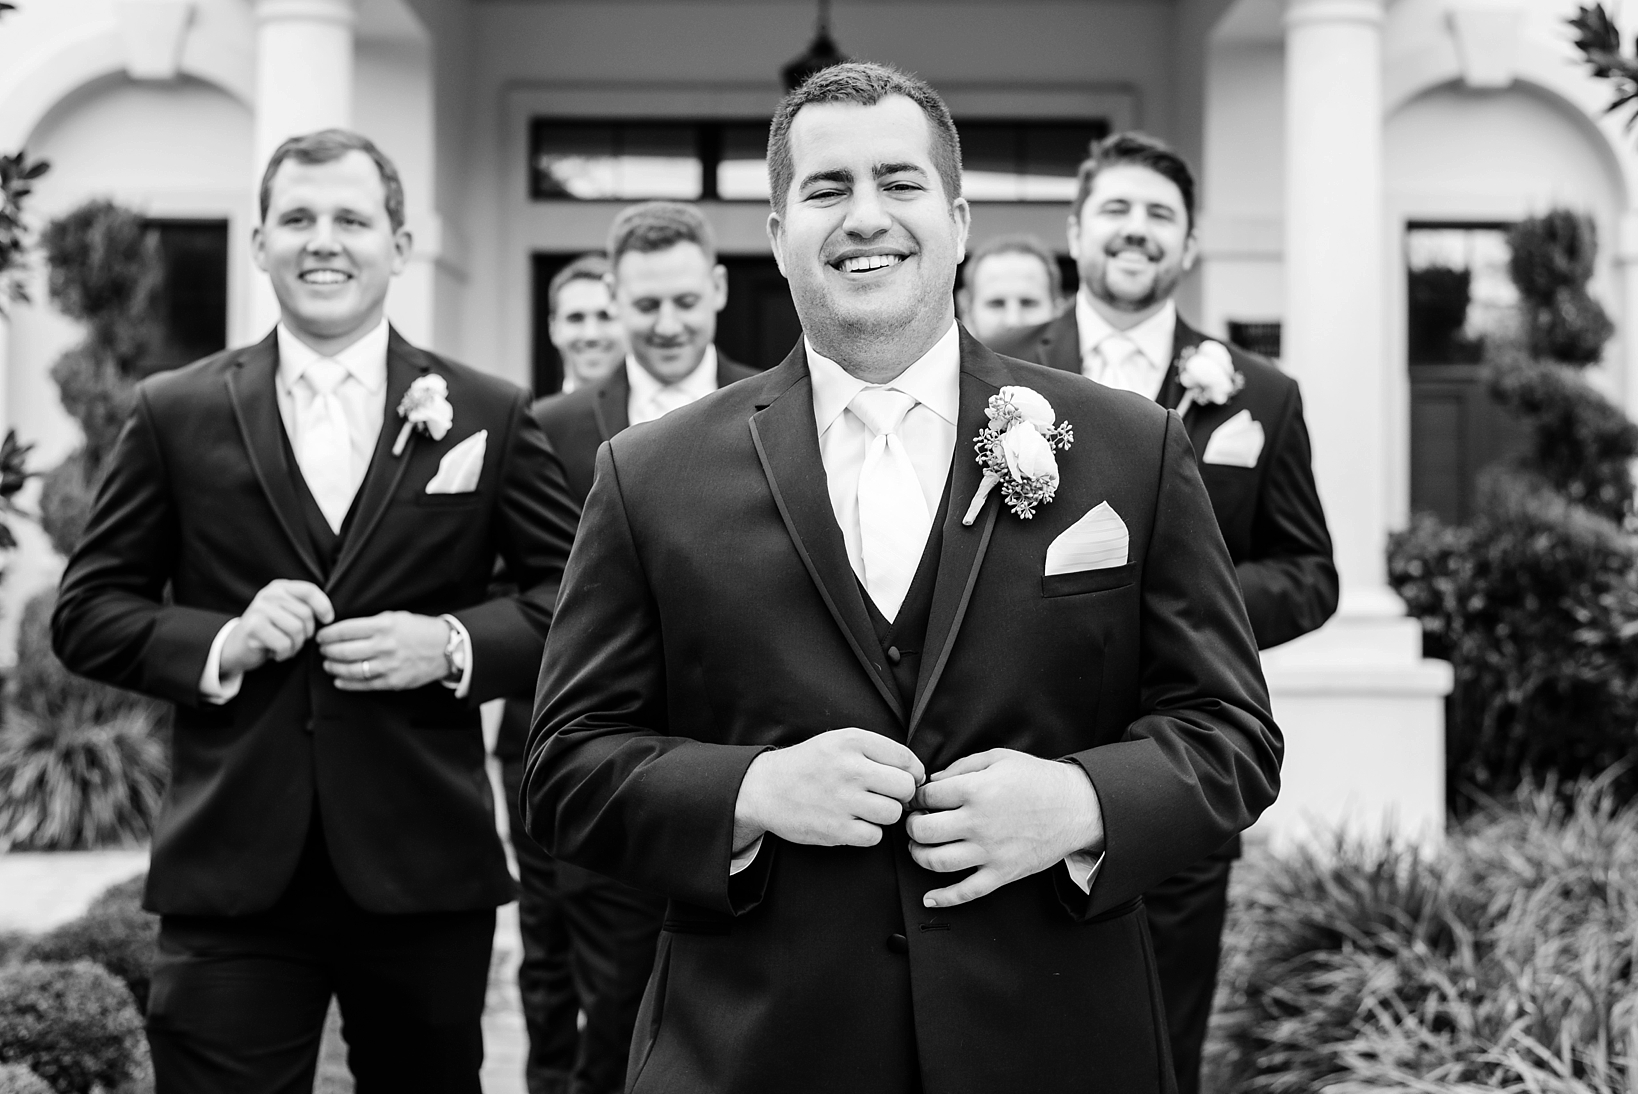 Groom followed by his Groomsmen in black and white walking toward the camera